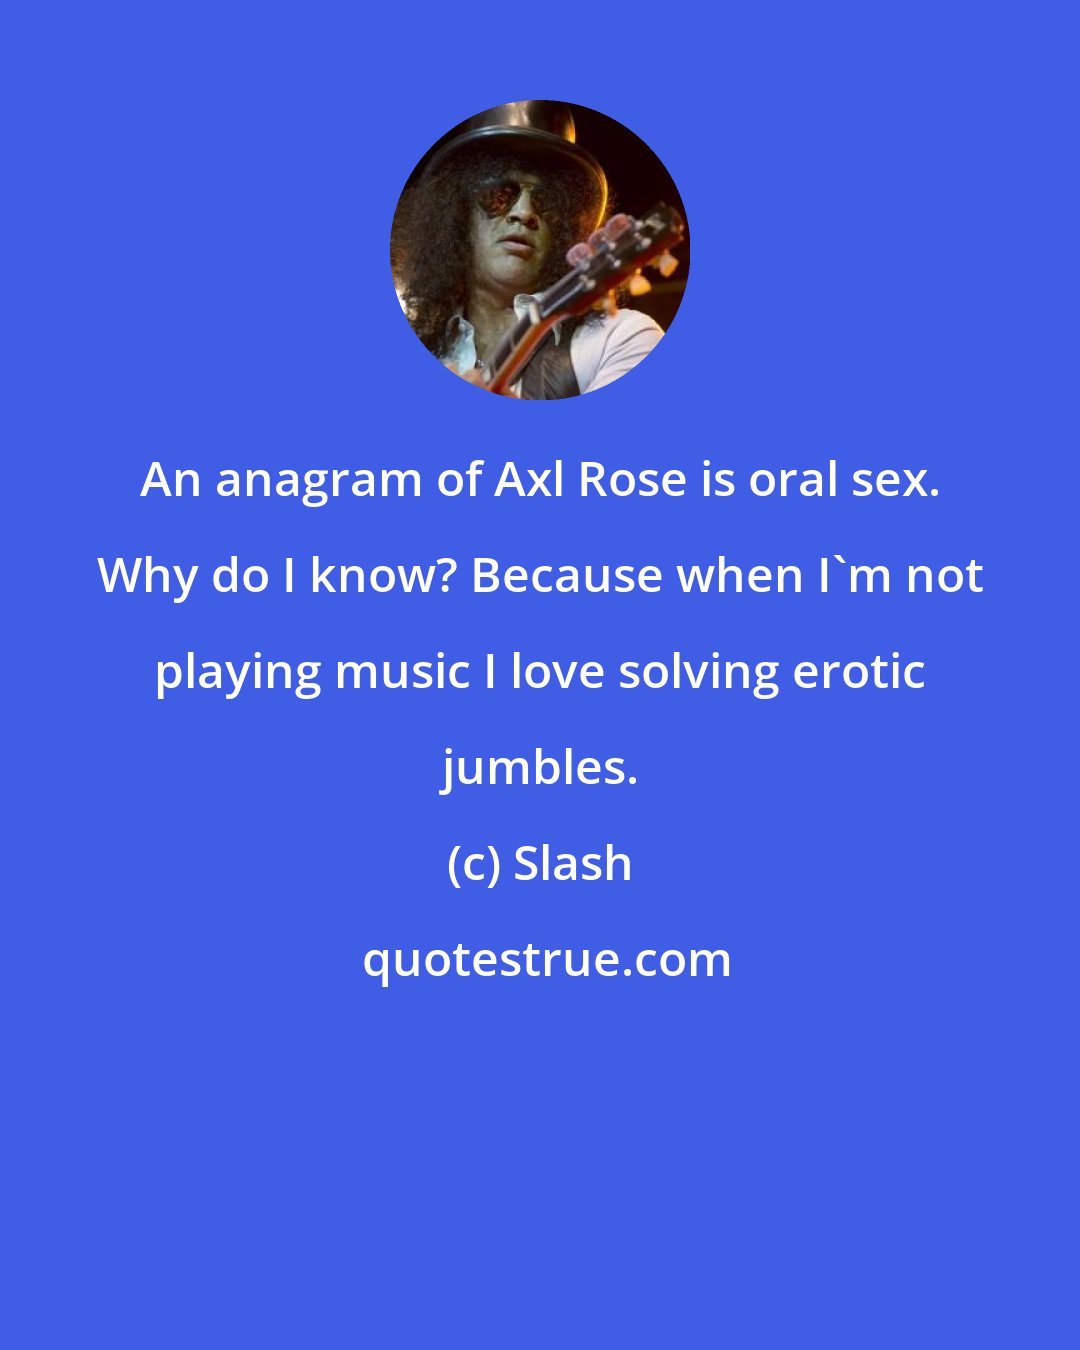 Slash: An anagram of Axl Rose is oral sex. Why do I know? Because when I'm not playing music I love solving erotic jumbles.